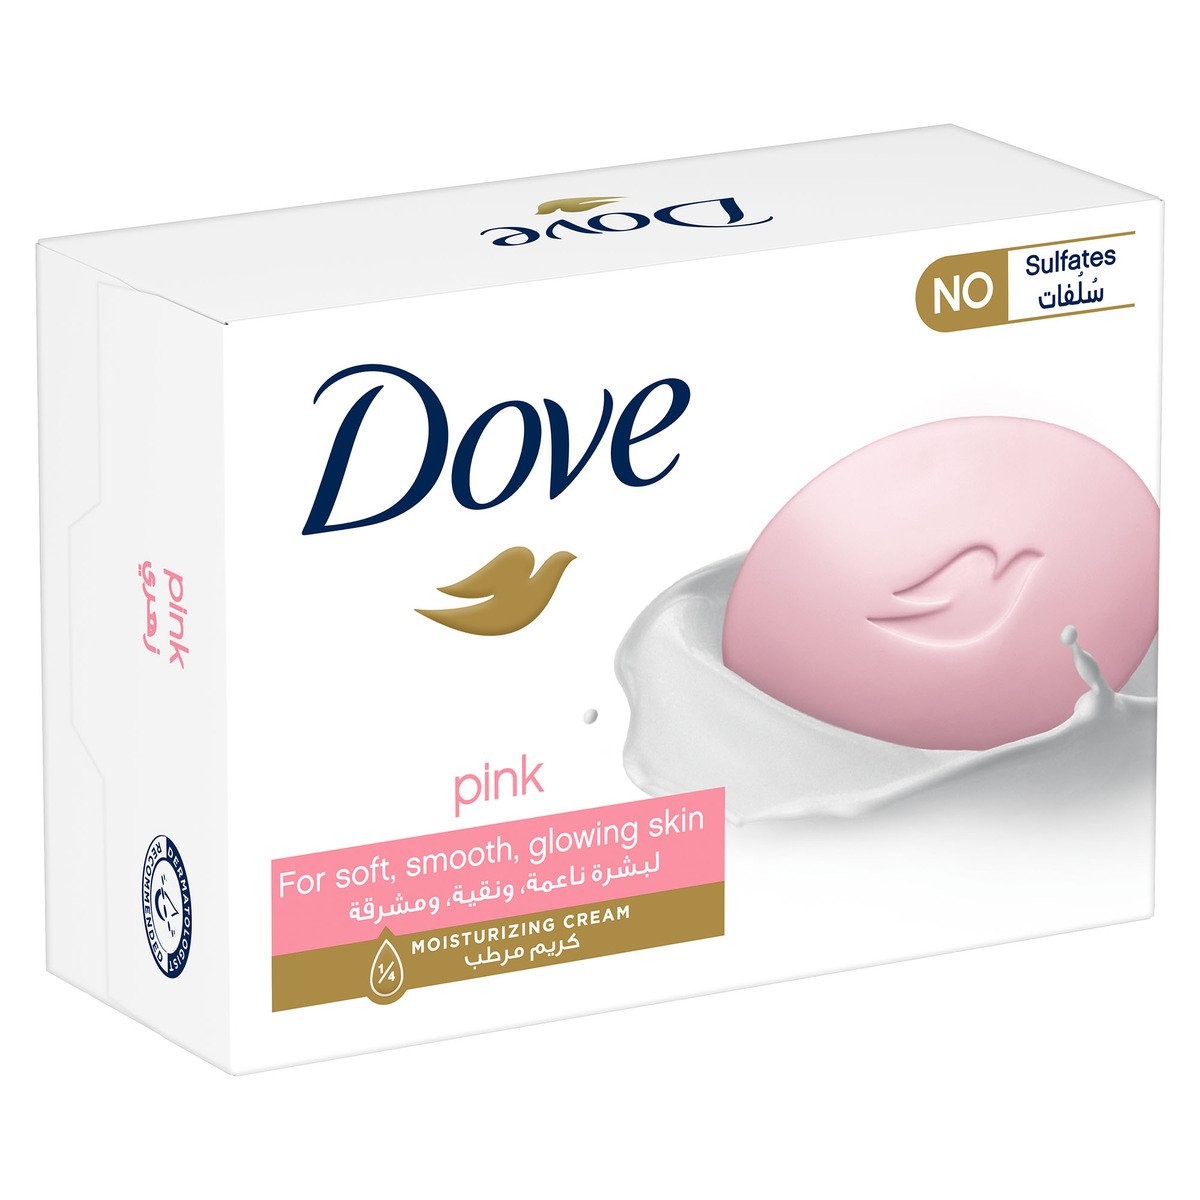 Dove Pink Bar Soap Value Pack 4 x 125 g